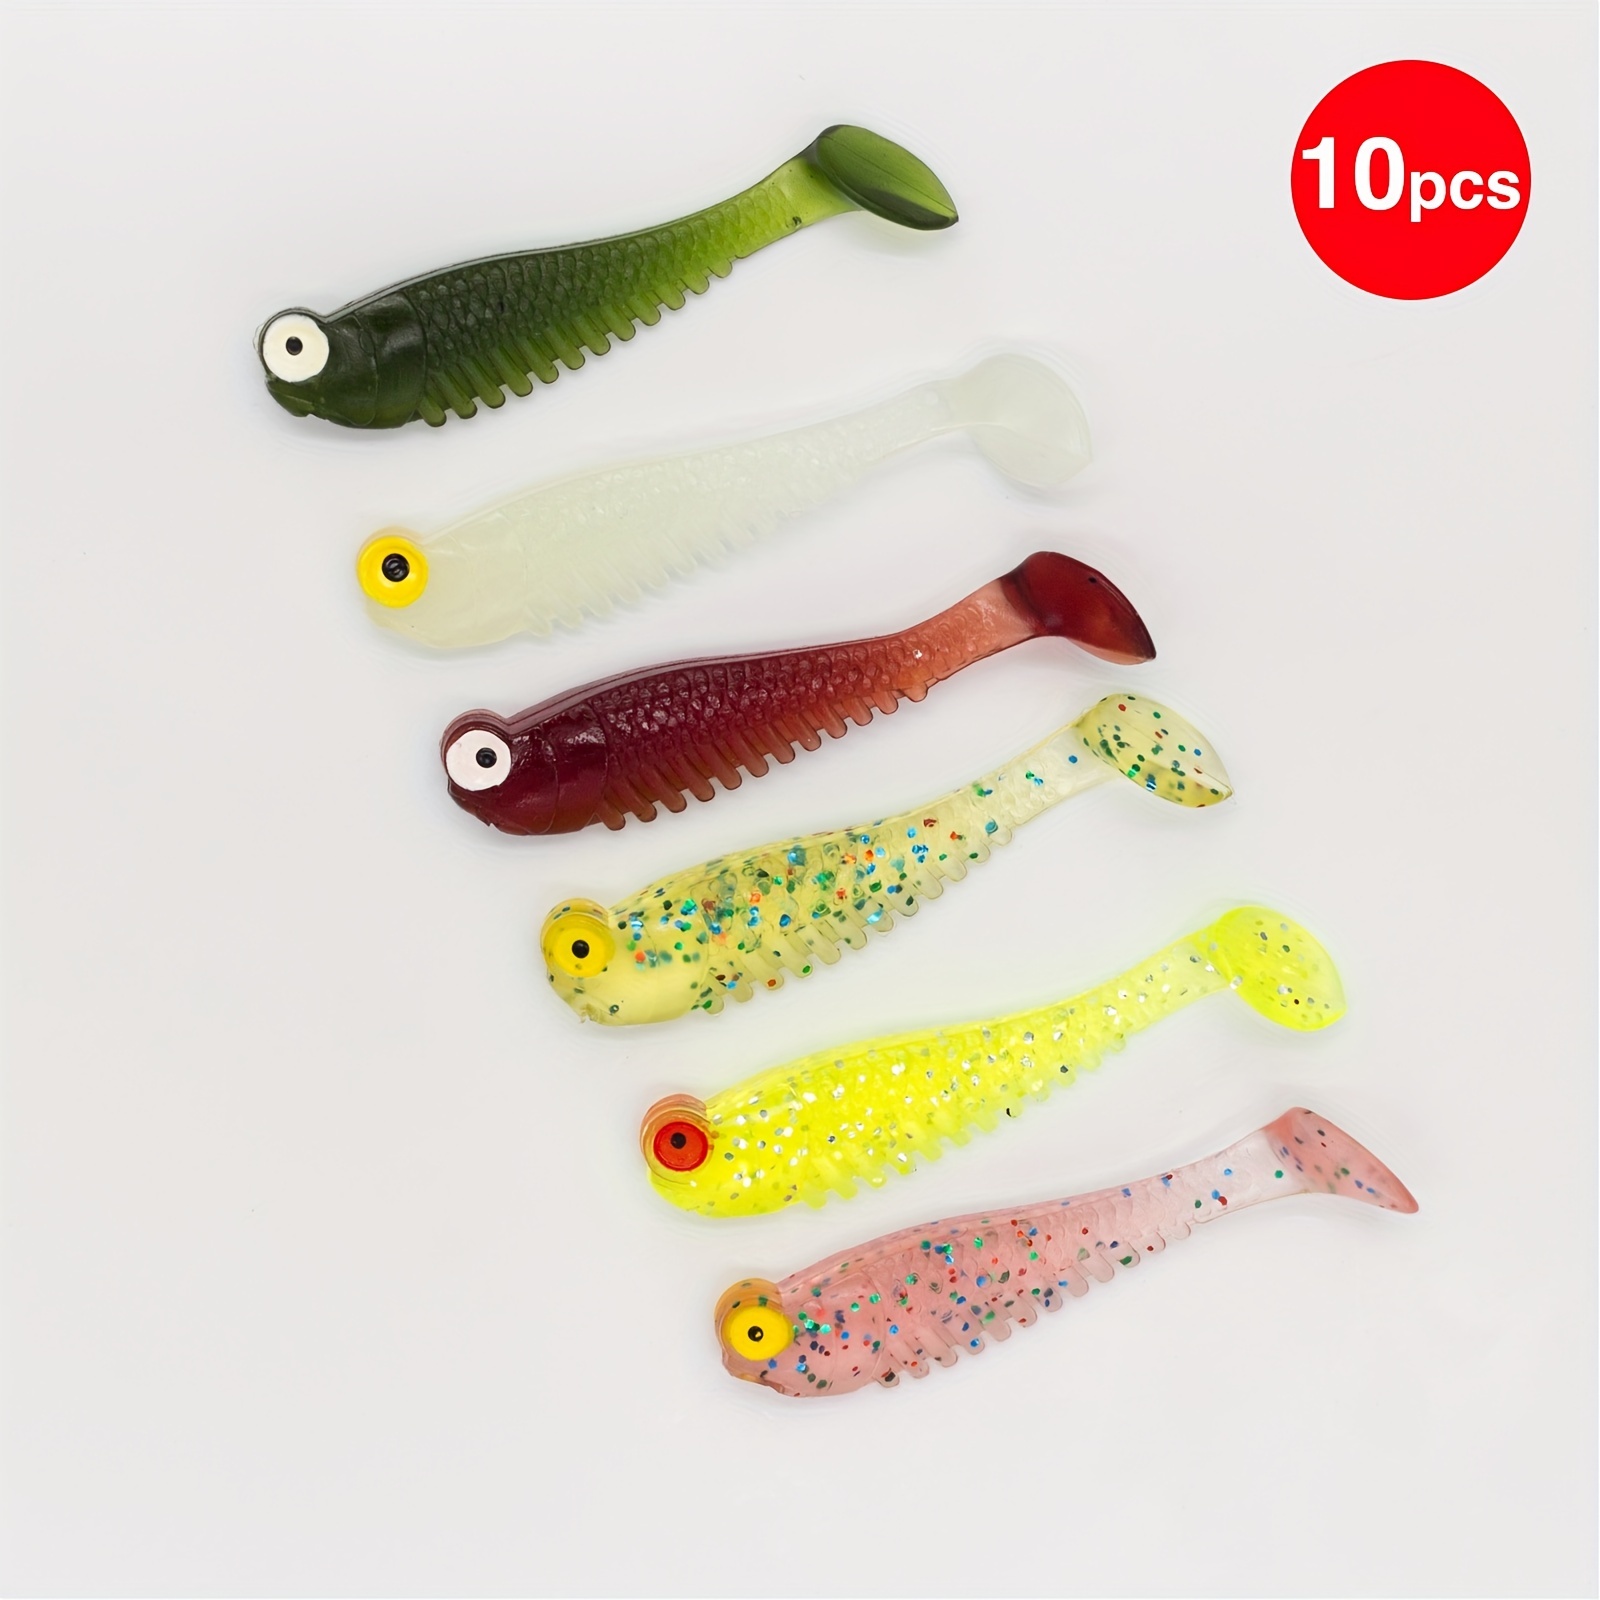 Soft Lures Premium Durable Shrimp Fishing Lures For Freshwater Or  Saltwater, Bass Fishing Jigs For Trout Crappie Fishing